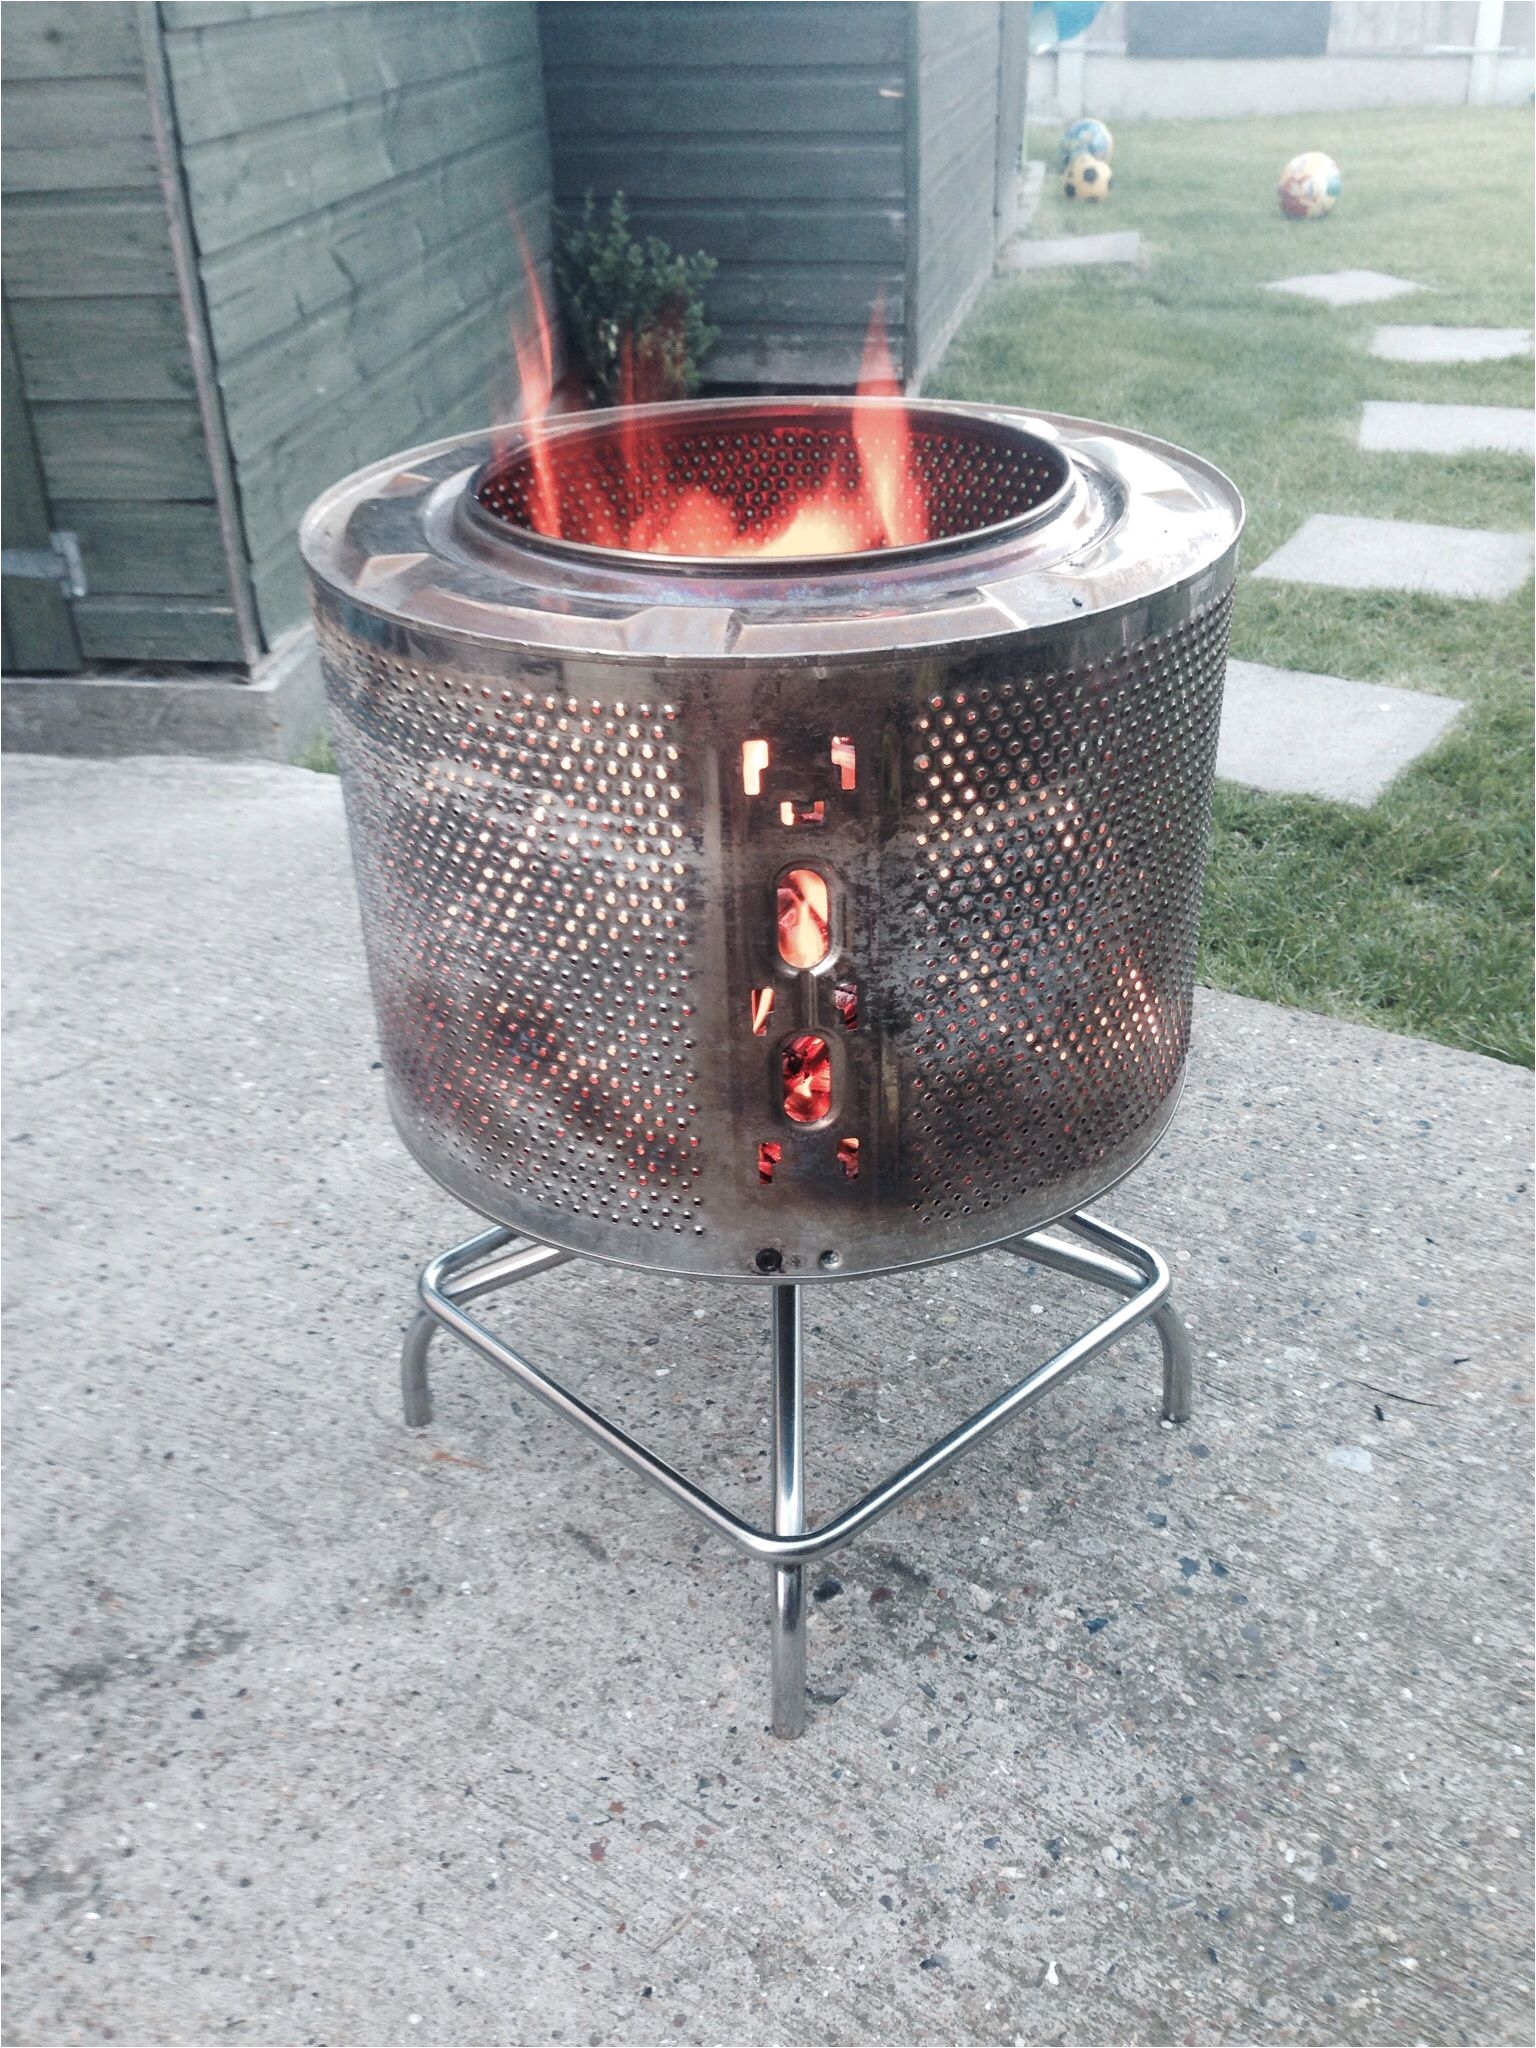 new fire pit washing machine drum and stainless steel stool base